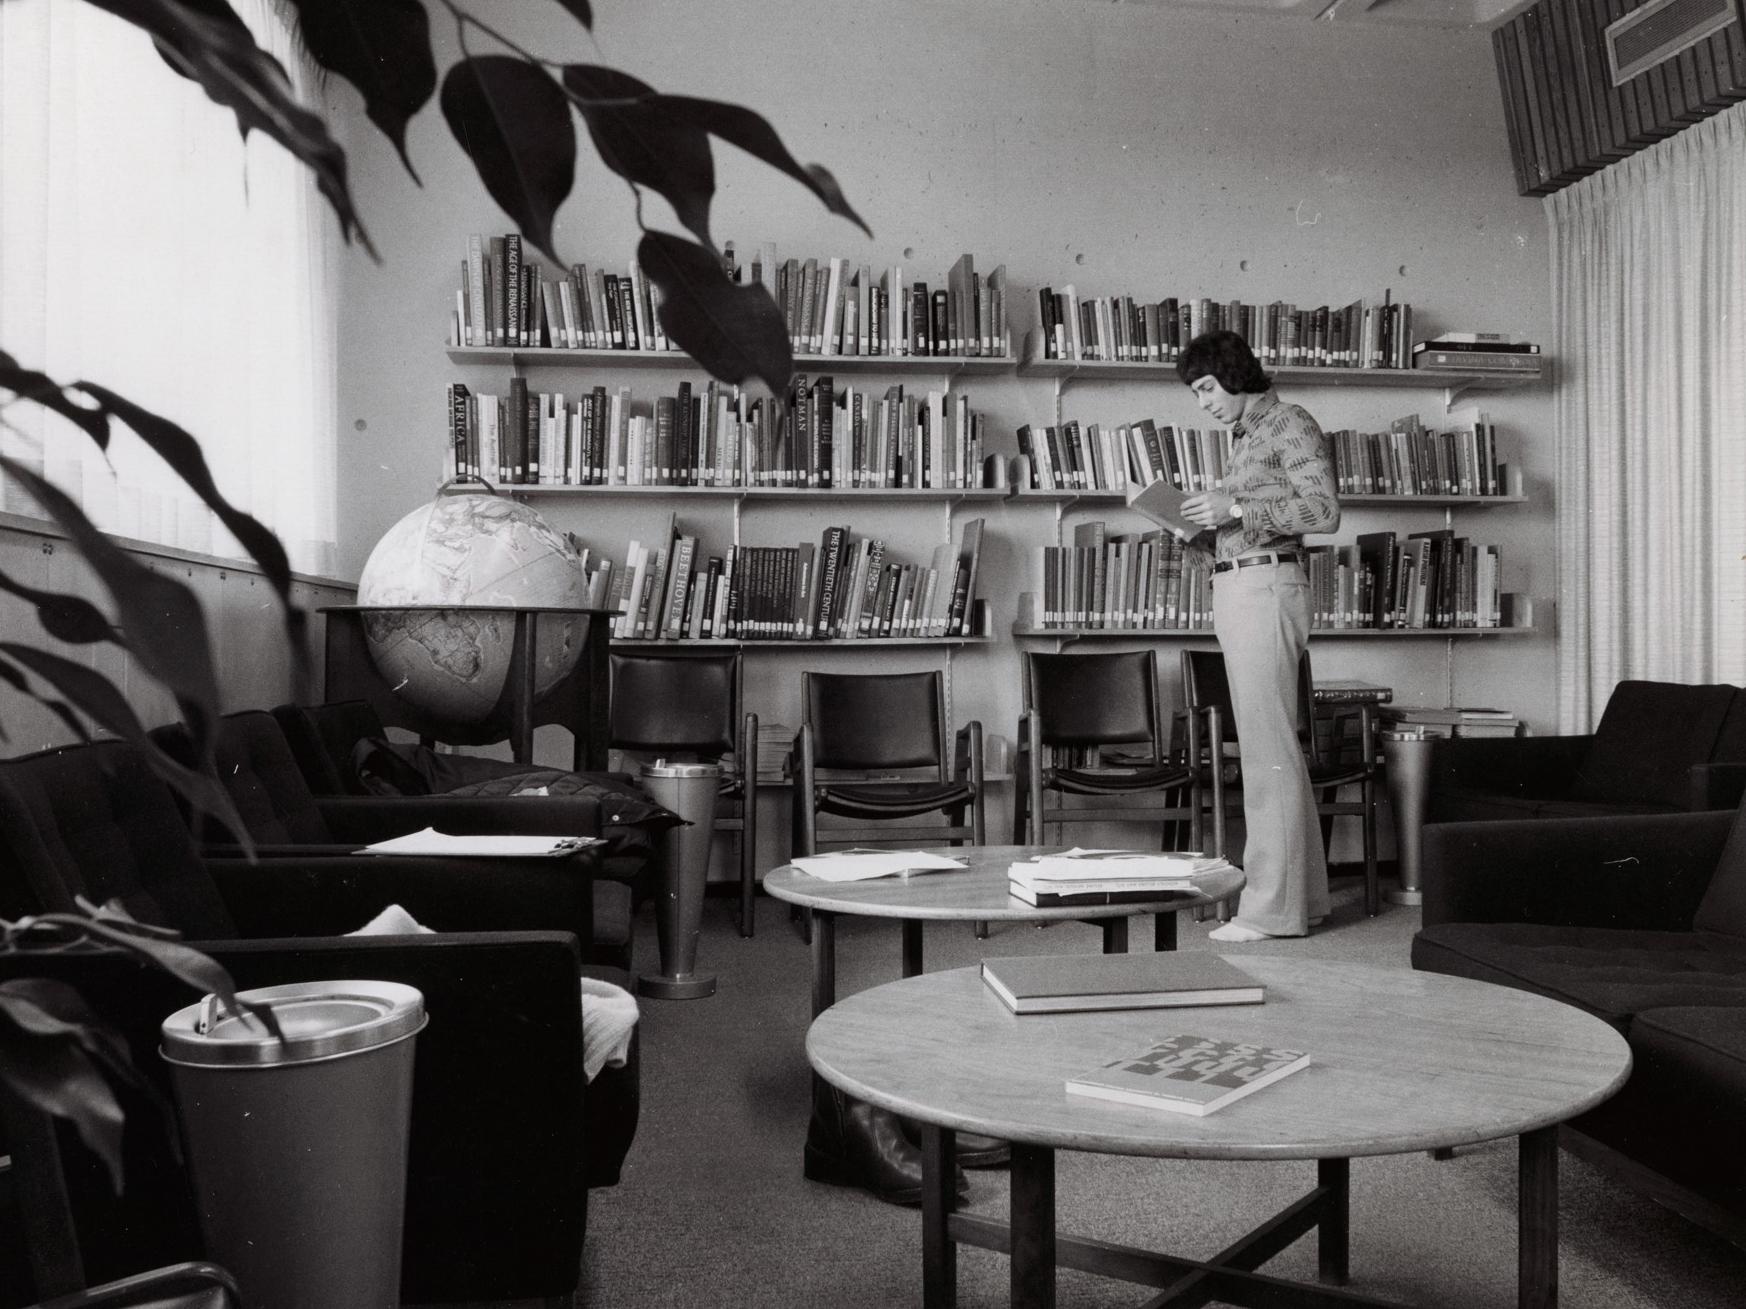 Historical Image of UTSC Library